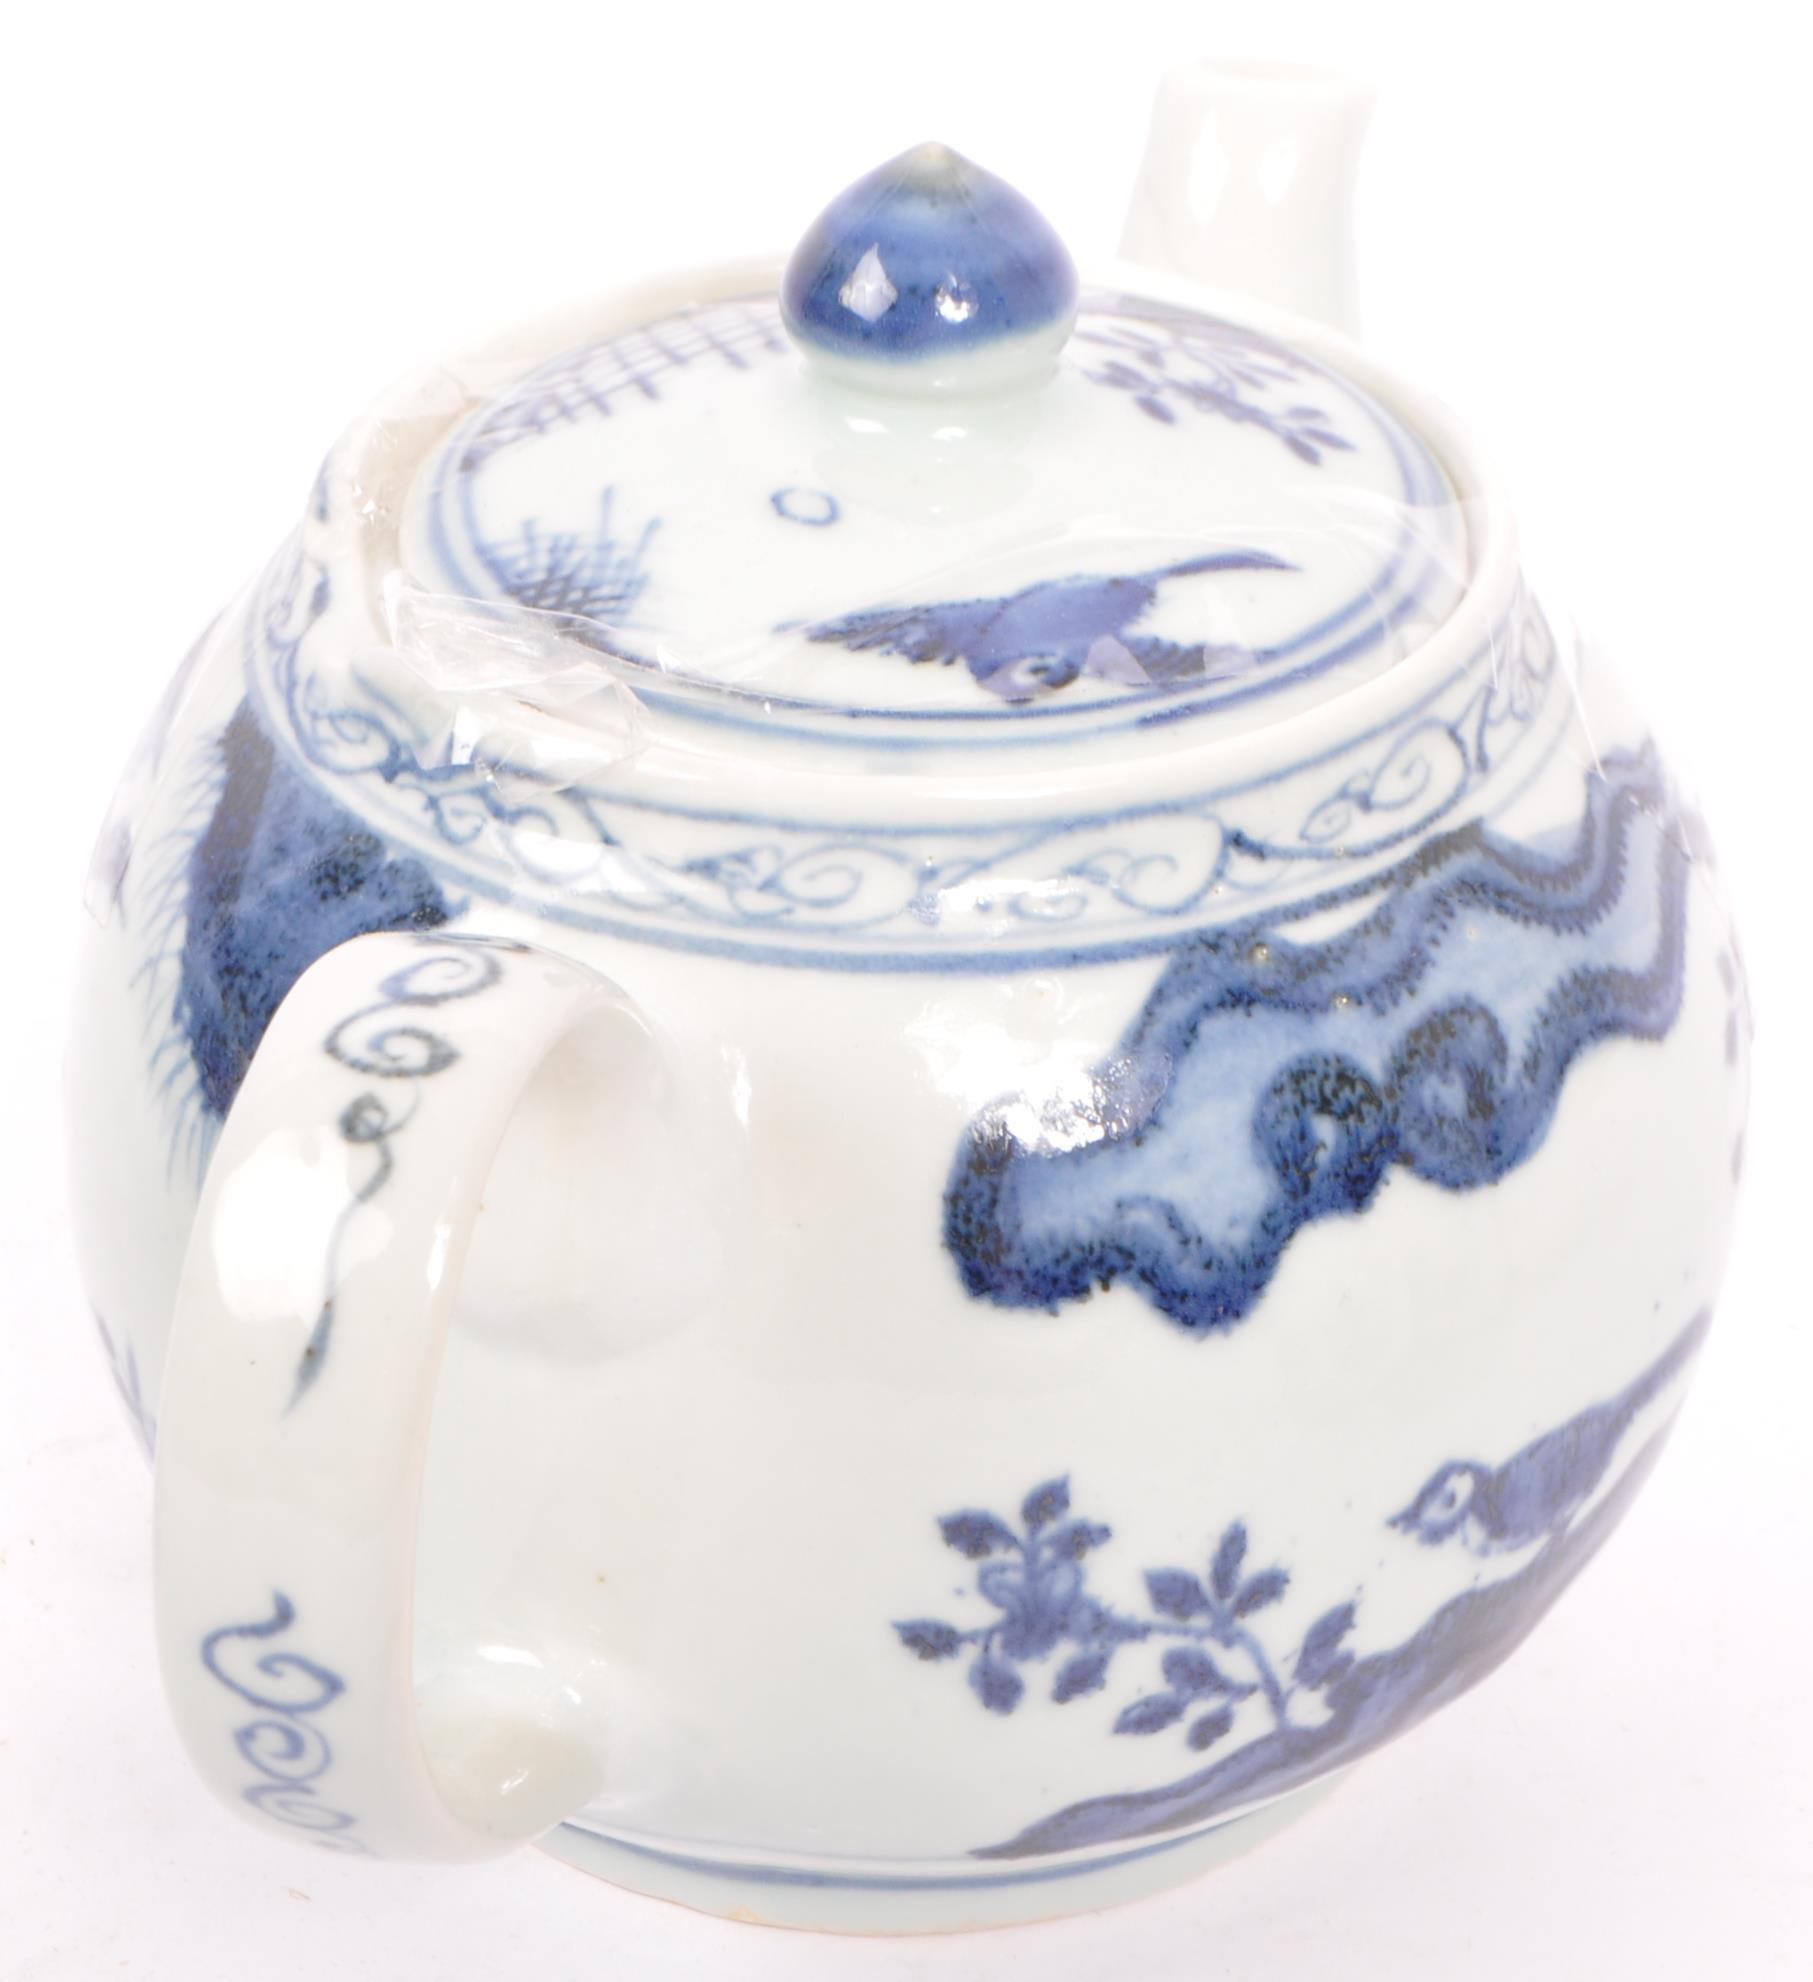 EARLY 20TH CENTURY CHINESE PORCELAIN TEA SERVICE - Image 5 of 9